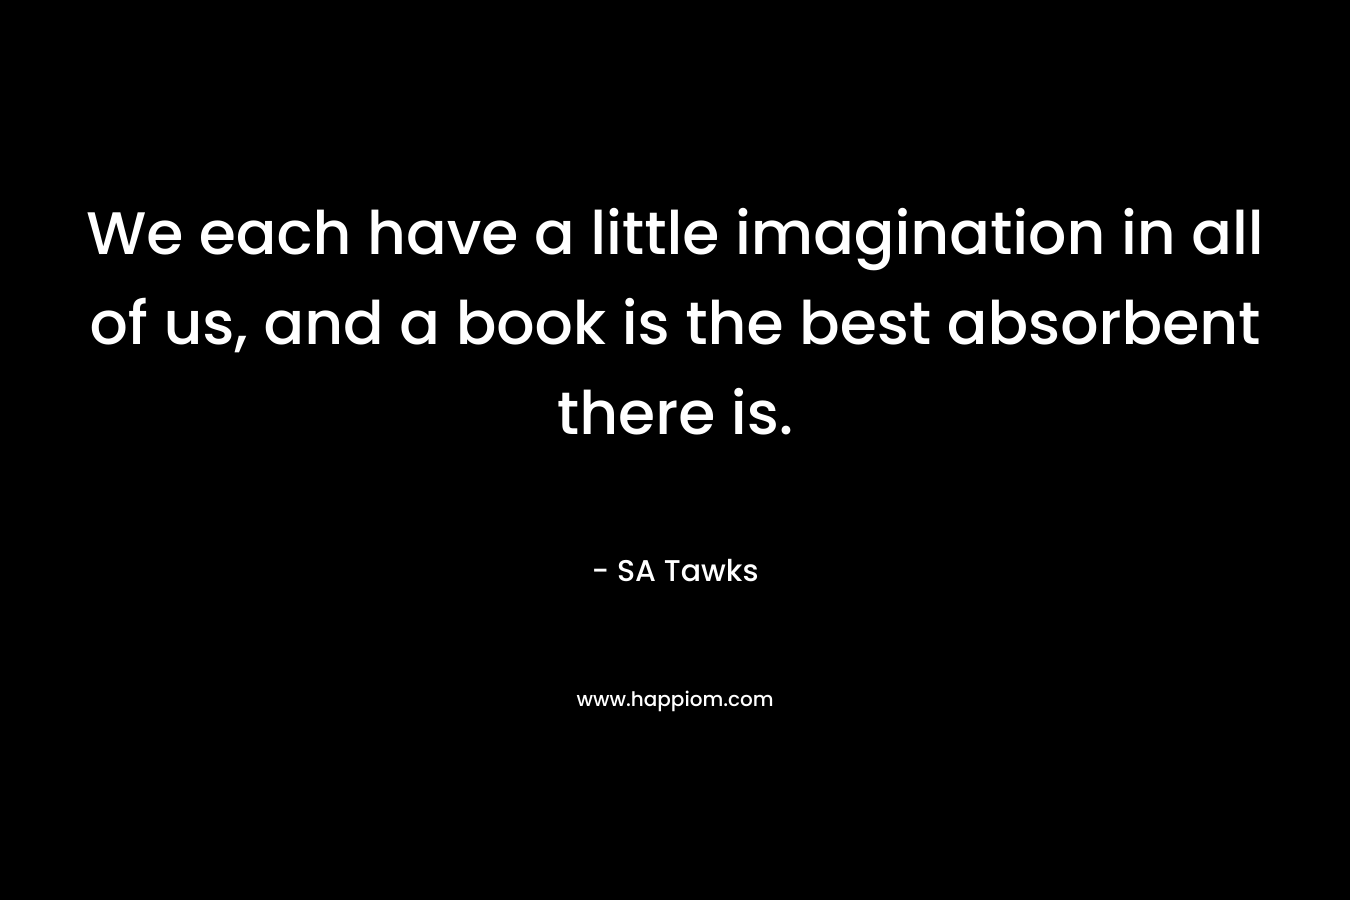 We each have a little imagination in all of us, and a book is the best absorbent there is. – SA Tawks